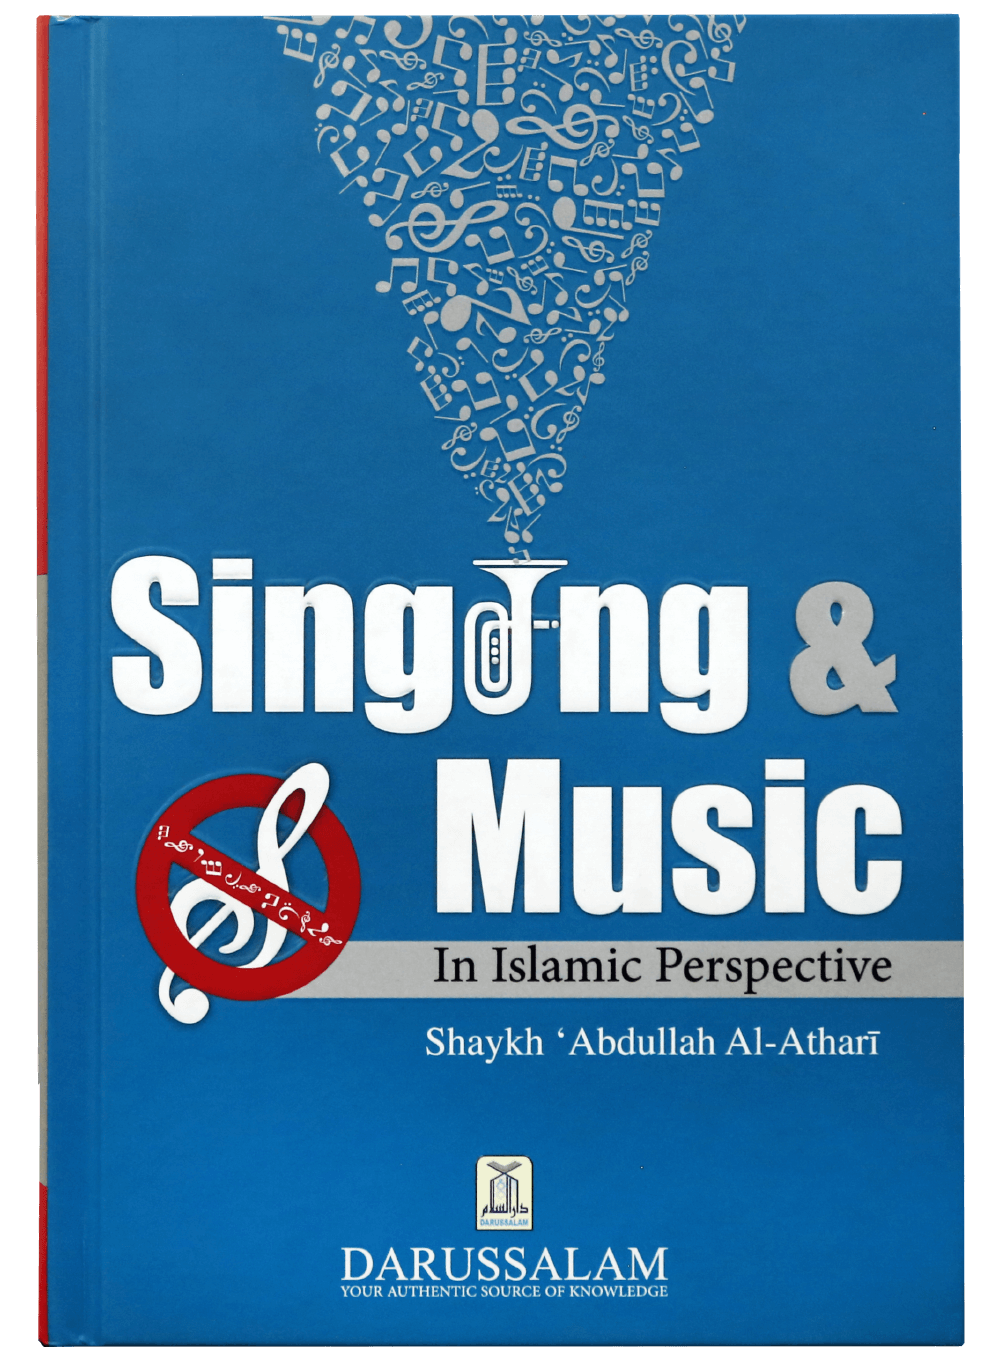 singing–music-in-islamic-perspective-darussalam-20180405-112058